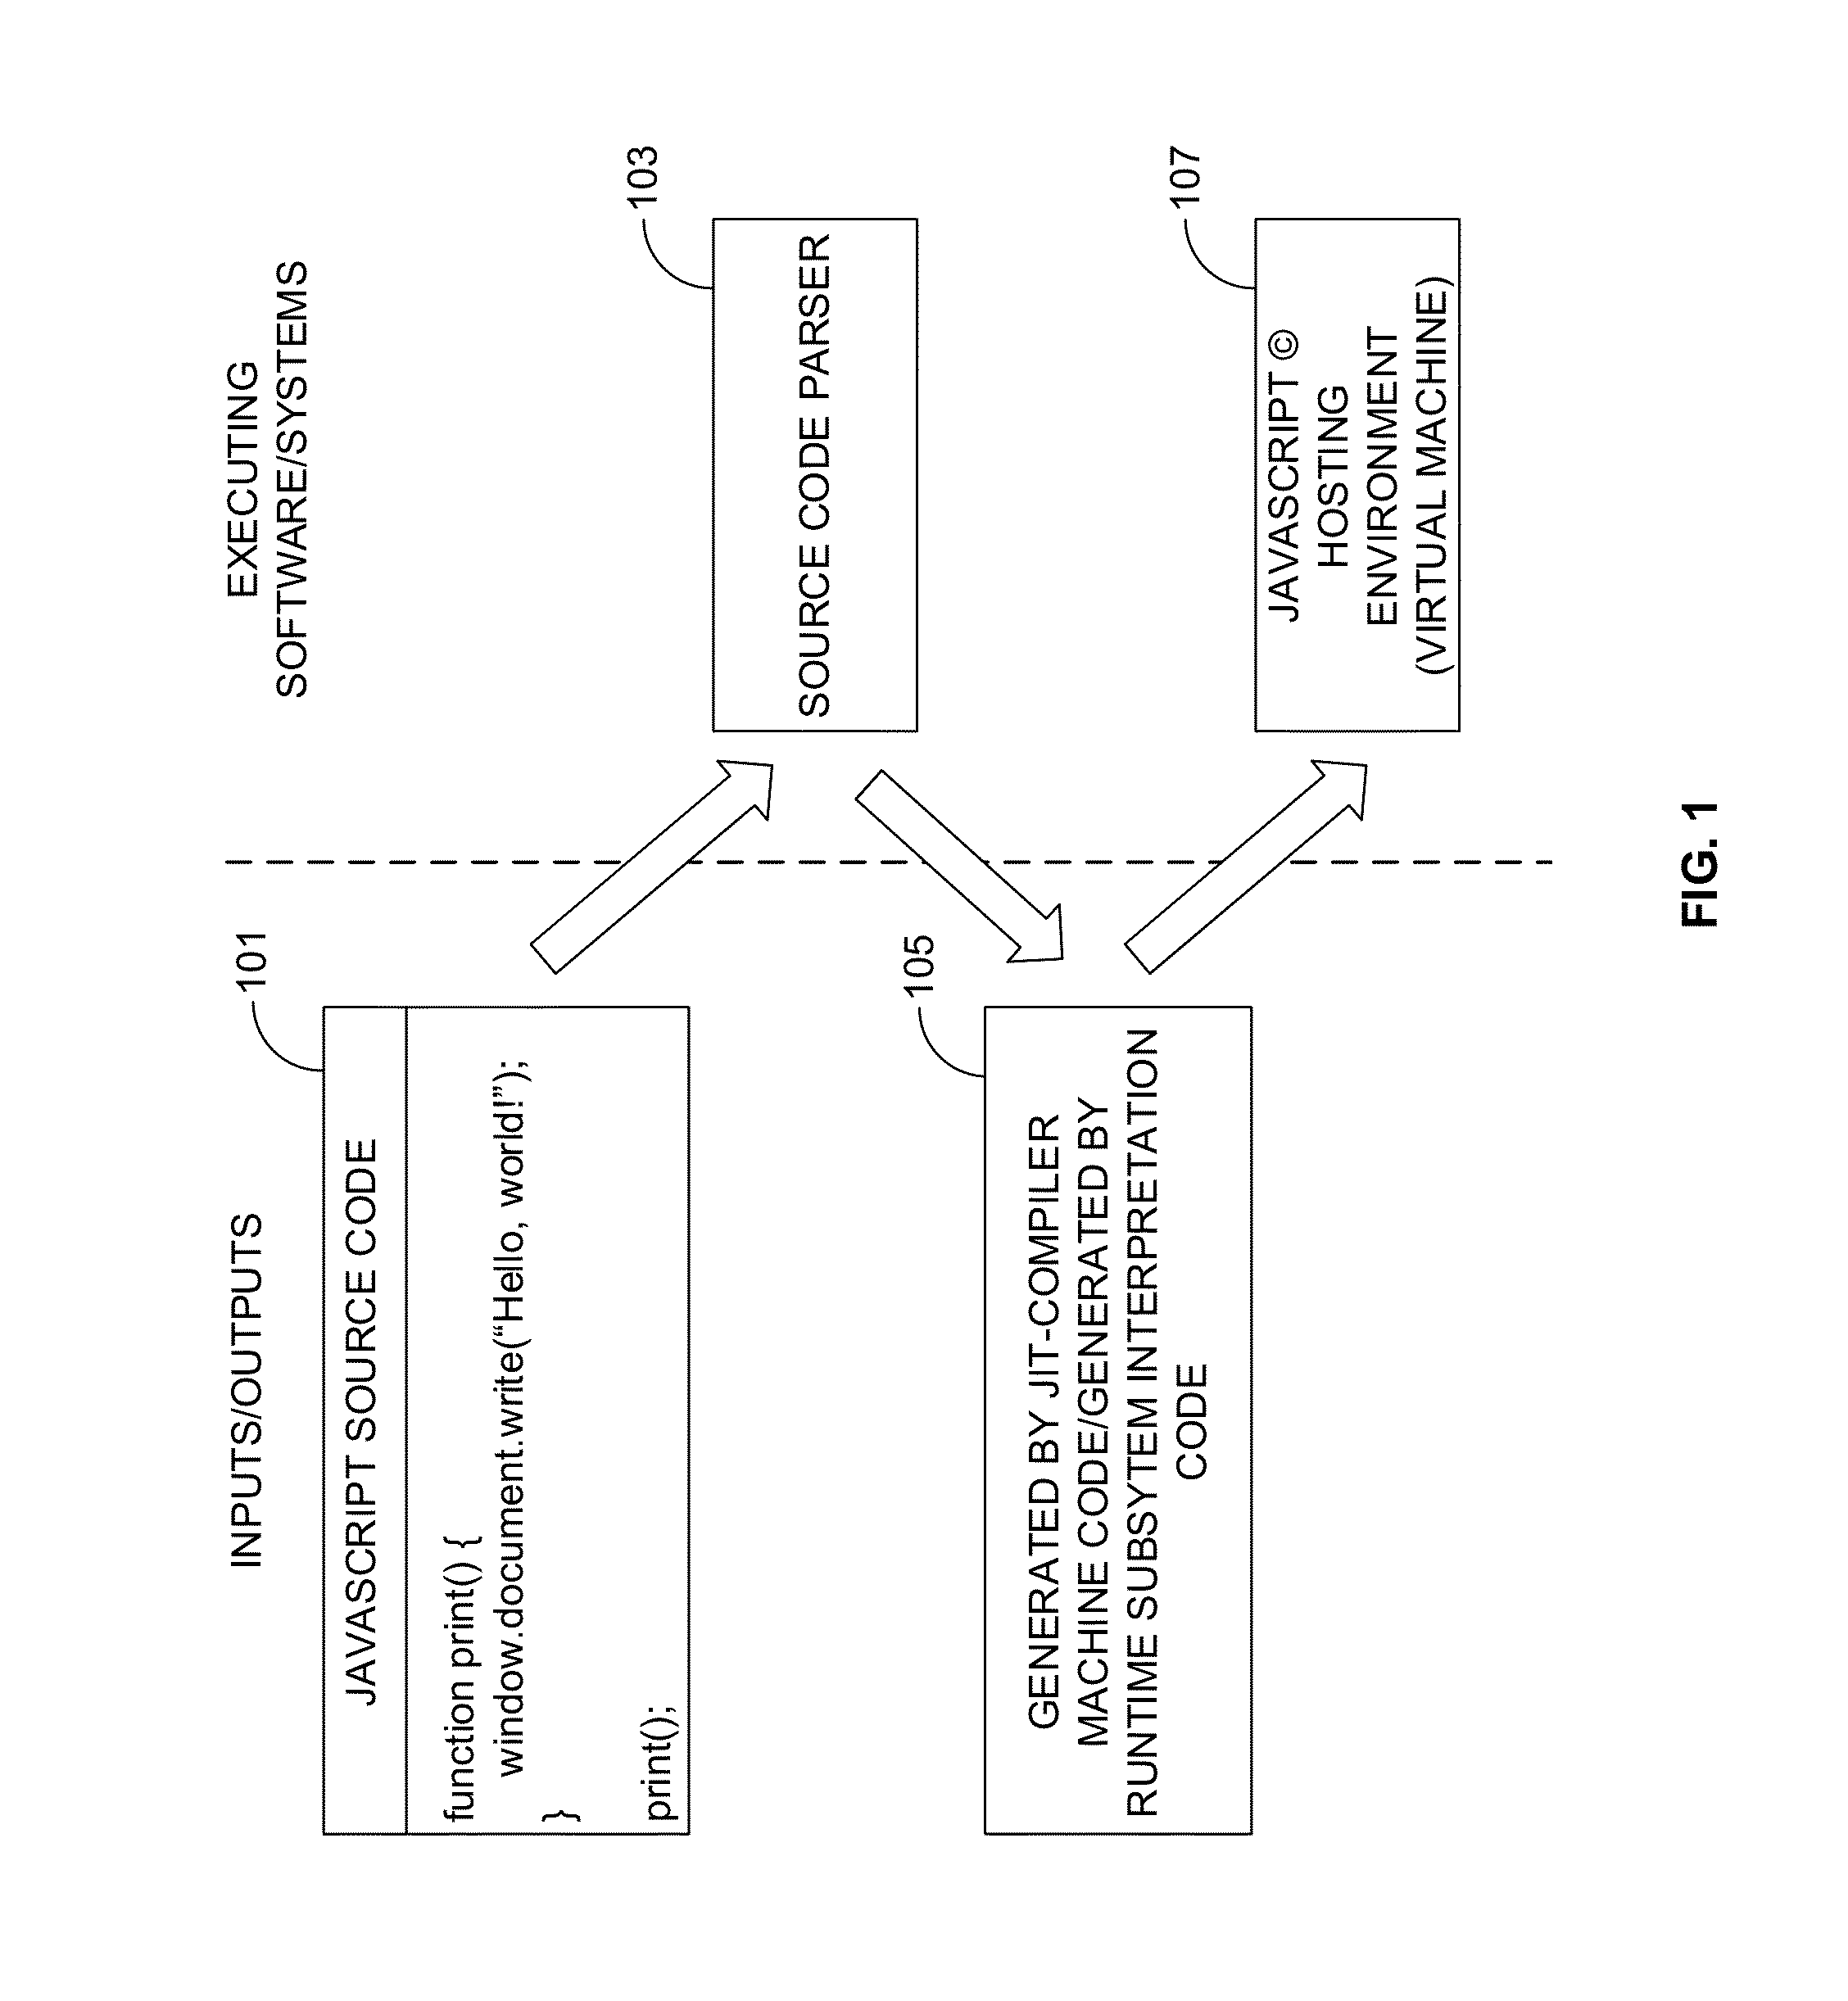 Method and system for implementing invocation stubs for the application programming interfaces embedding with function overload resolution for dynamic computer programming languages